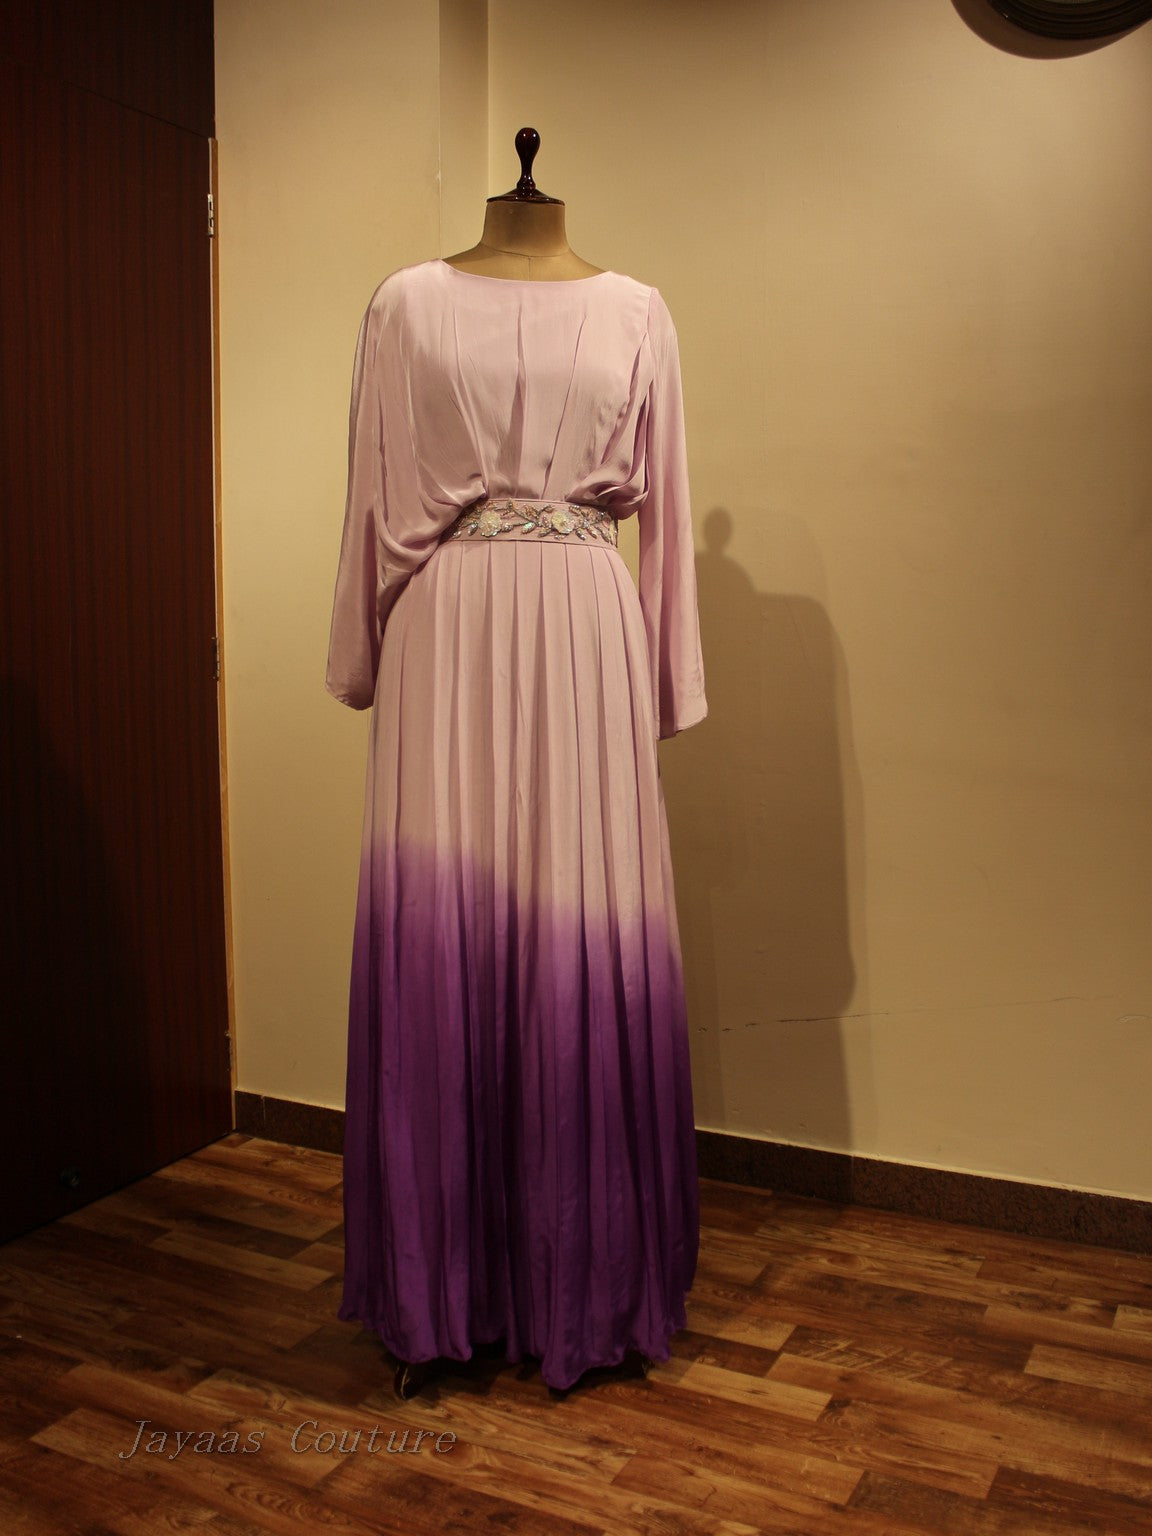 Lavander shaded gown with belt